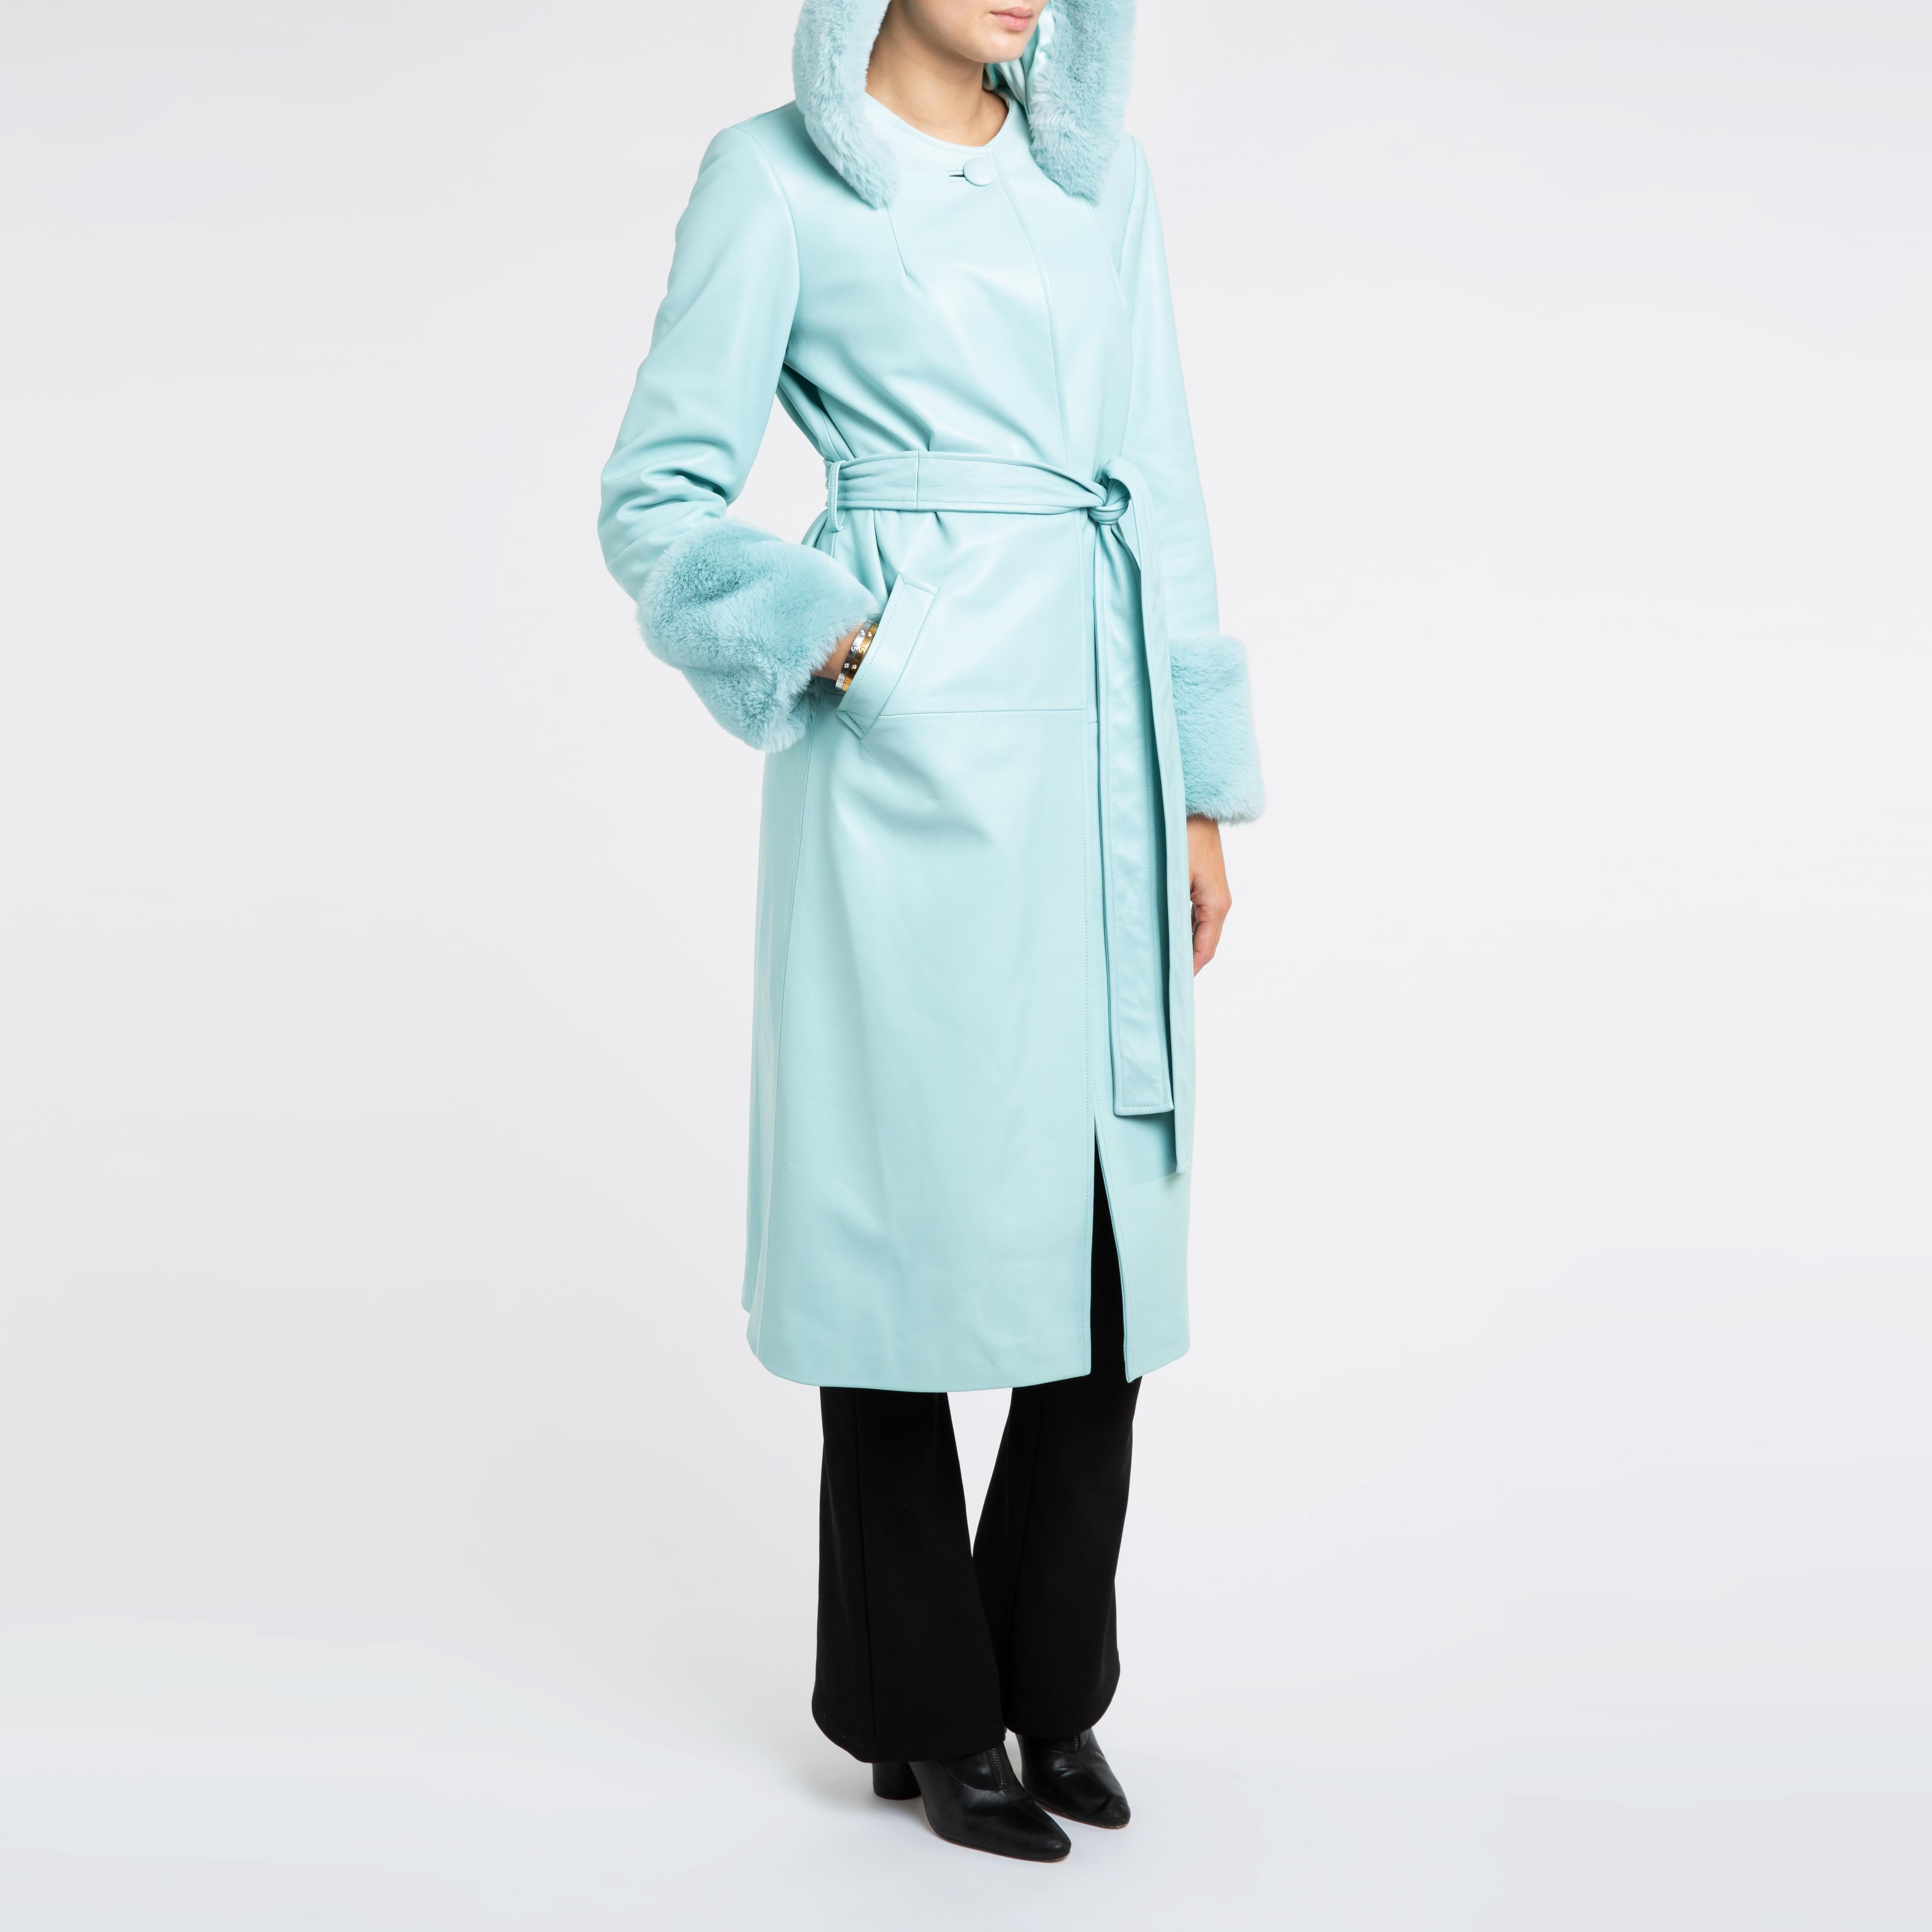 Verheyen London Hooded Leather Coat in Blue Aquamarine & Faux Fur - Size uk 12

Handmade in London, made with 100% Italian Lambs Leather and the highest quality of faux fur to match, this luxury item is an investment piece to wear for a lifetime. 